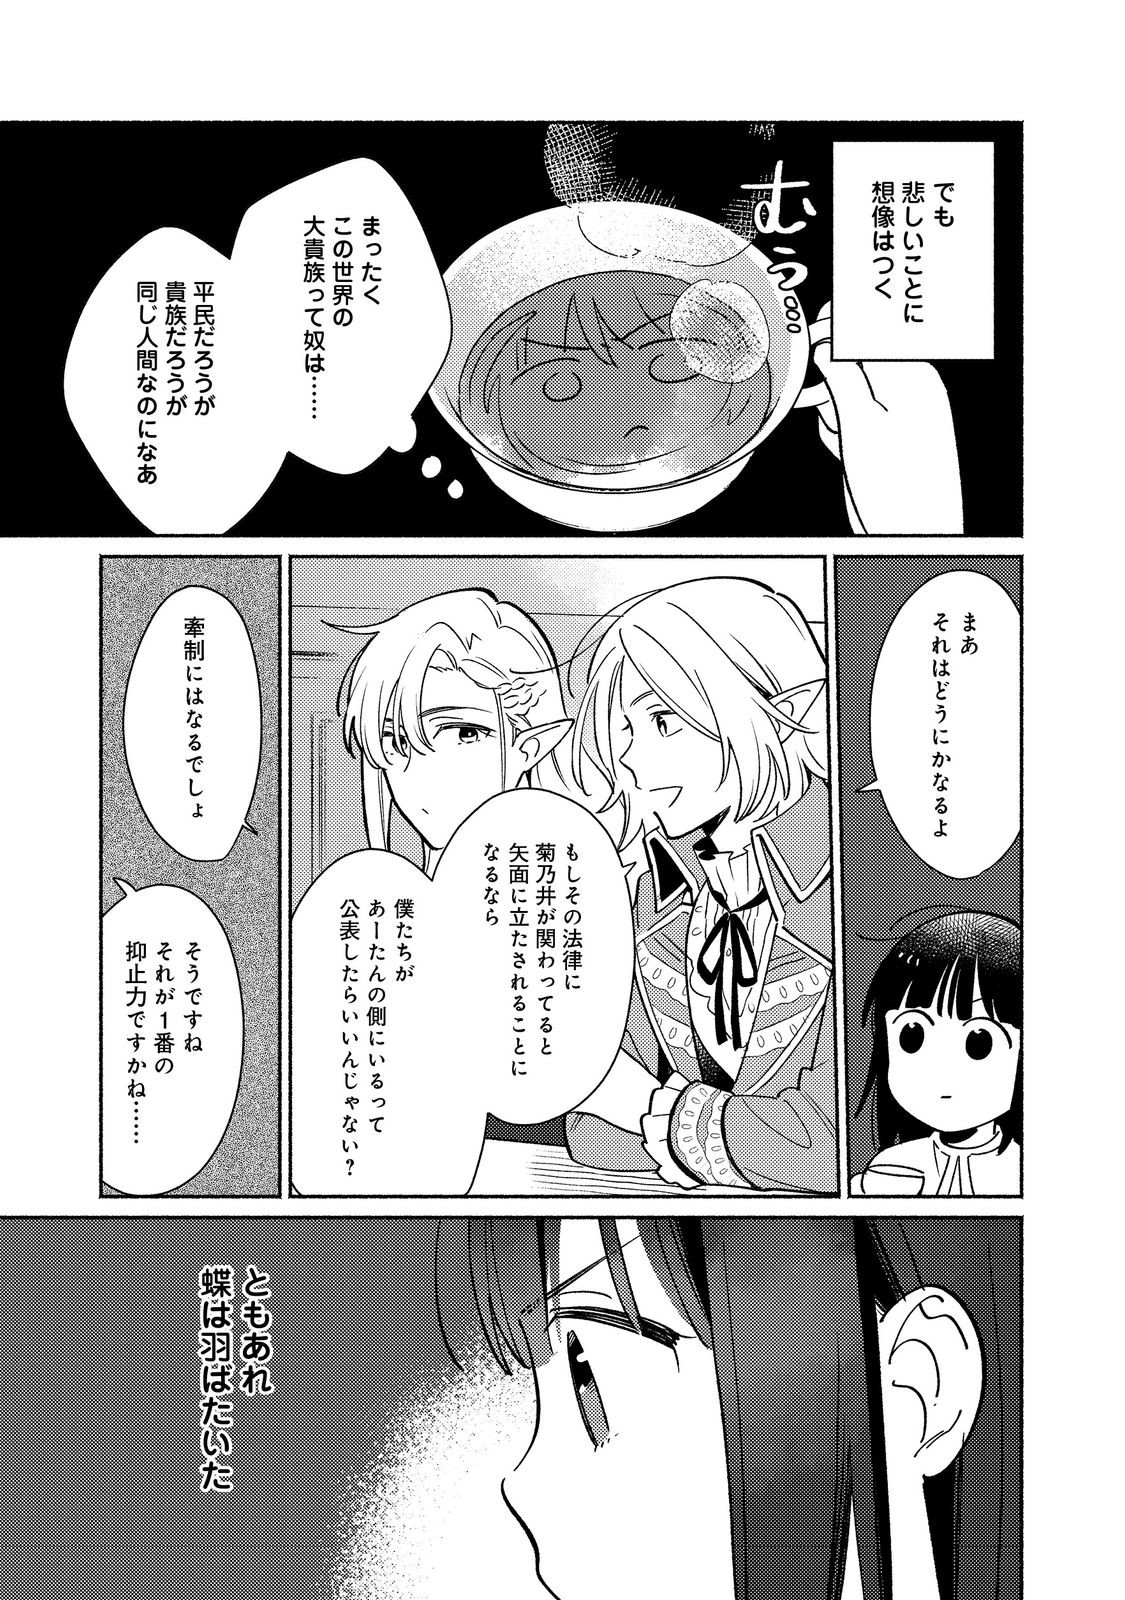 I’m the White Pig Nobleman 第20.1話 - Page 15